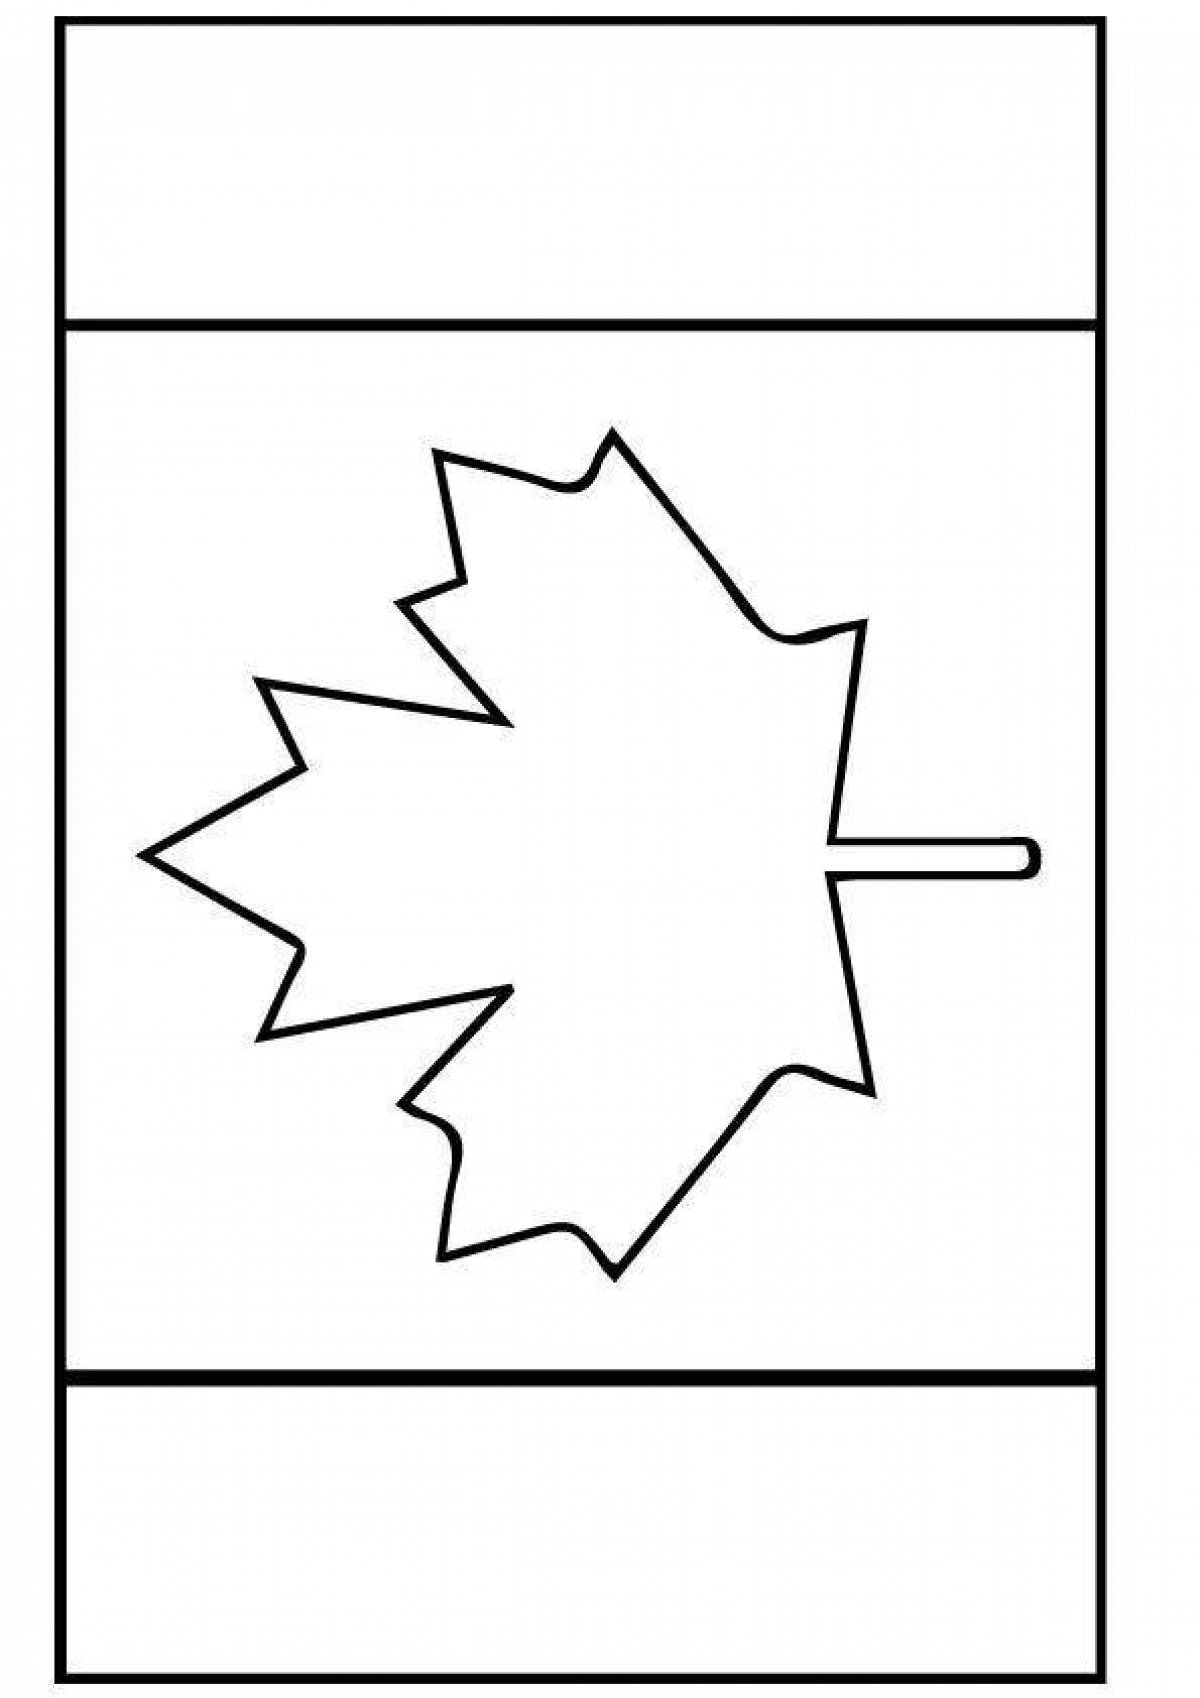 Coloring page royal canadian flag